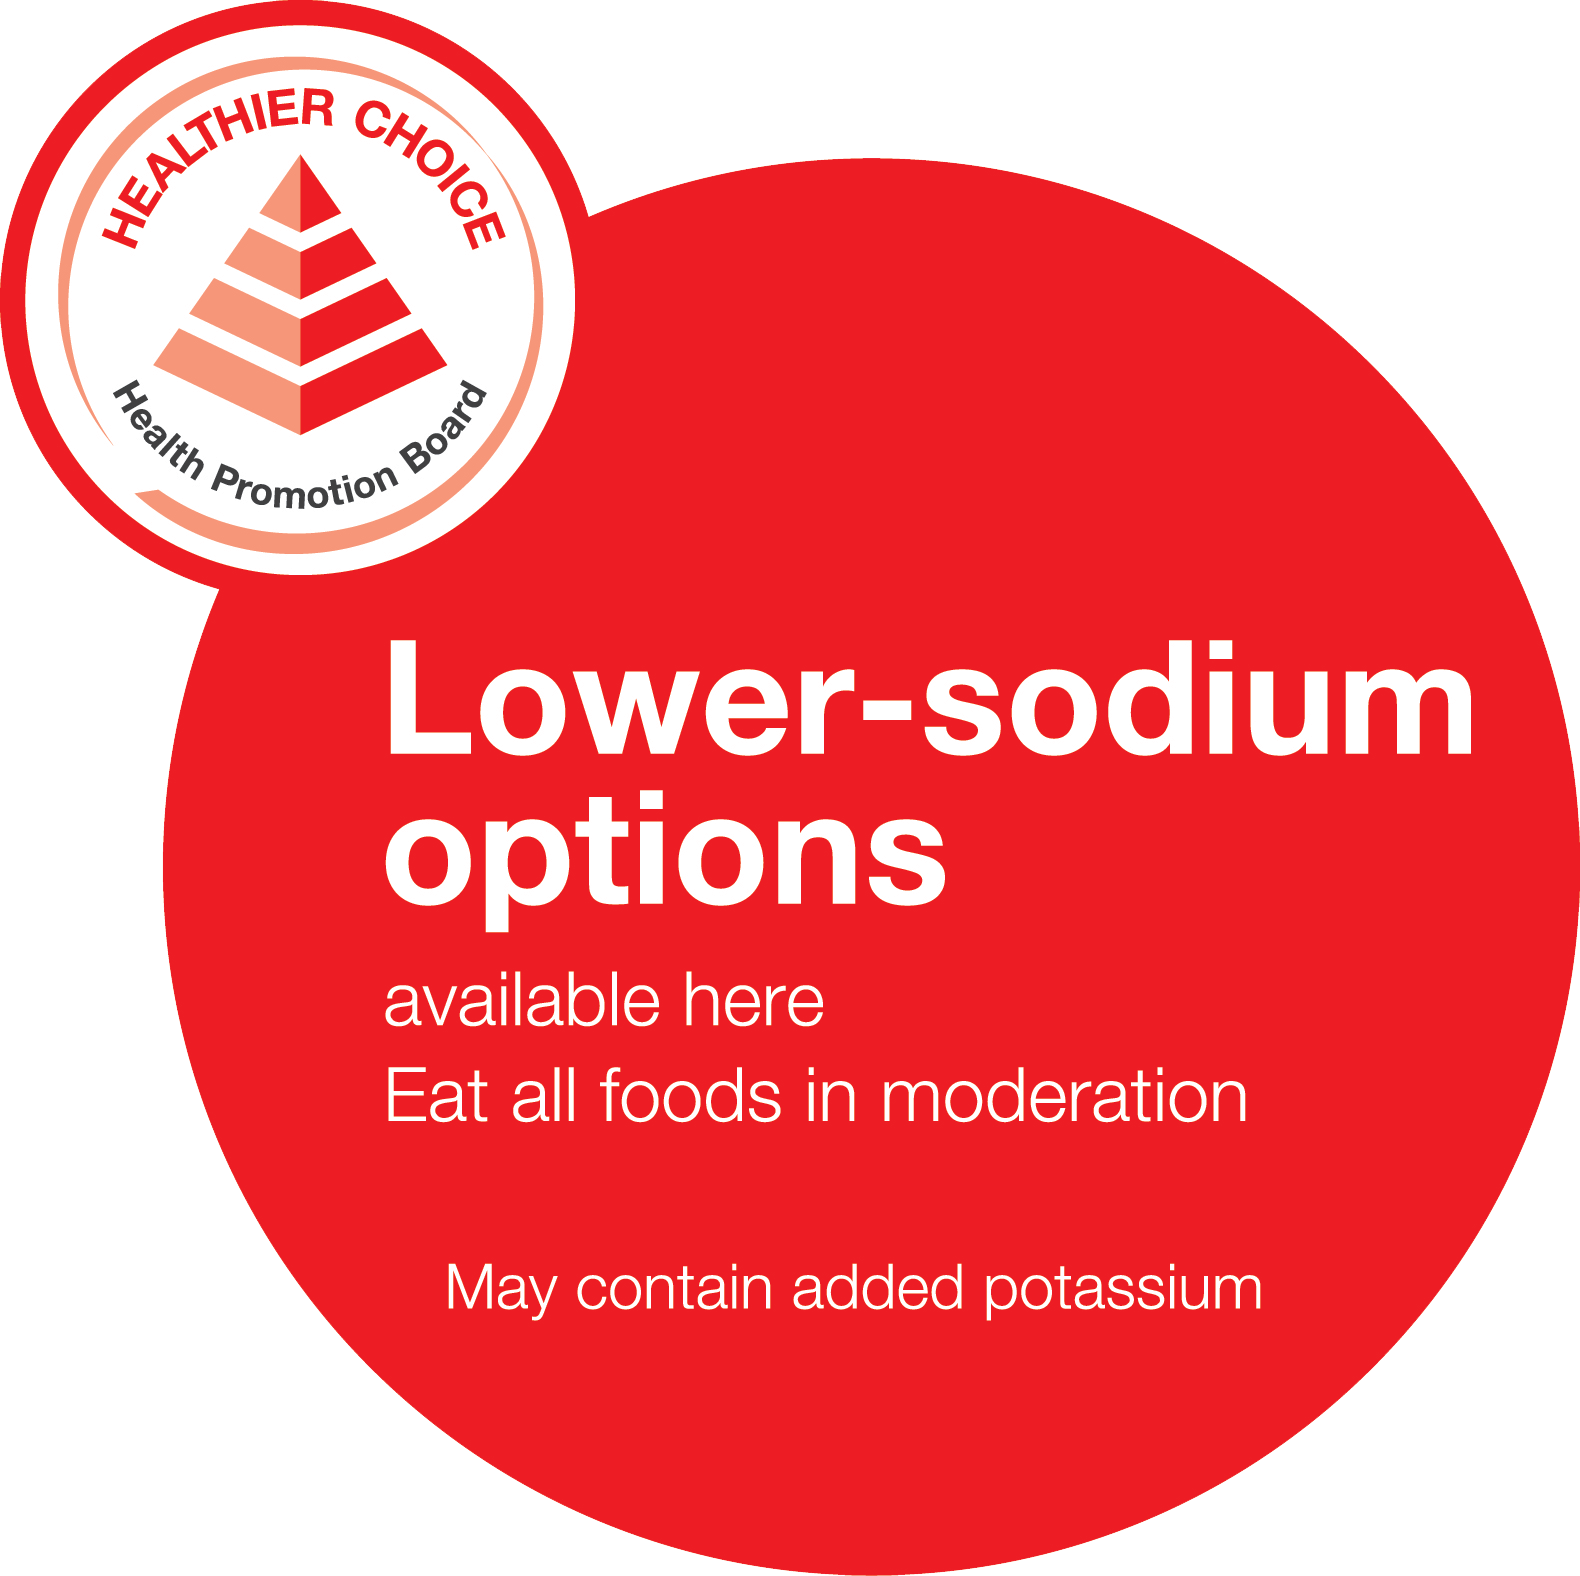 Look out for dishes marked with the Healthier Choice Lower-Sodium identifier.